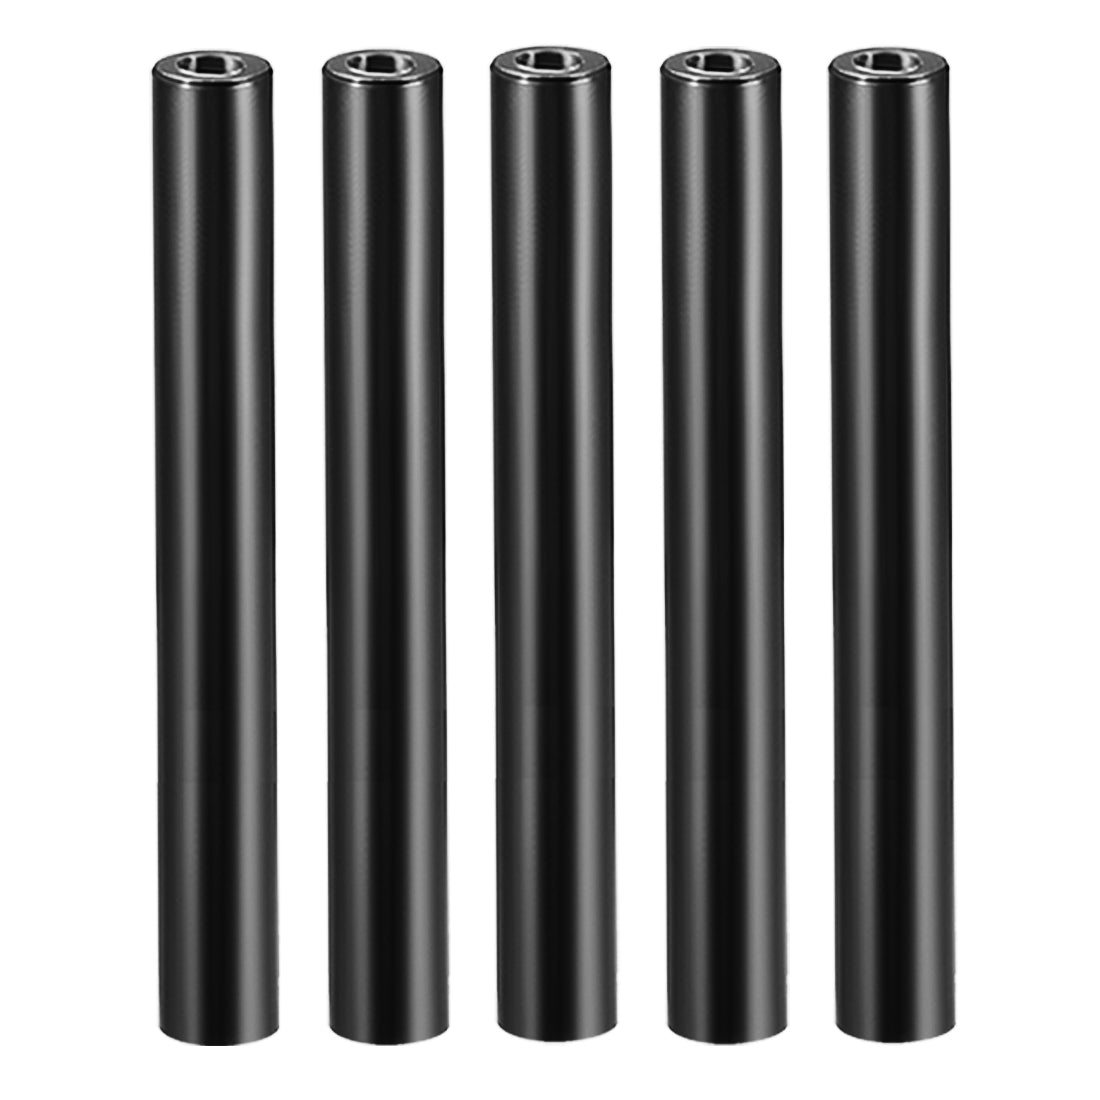 uxcell Uxcell Round Aluminum Standoff Column Spacer M3x90mm,for RC Airplane,FPV Quadcopter,CNC,Black,5pcs